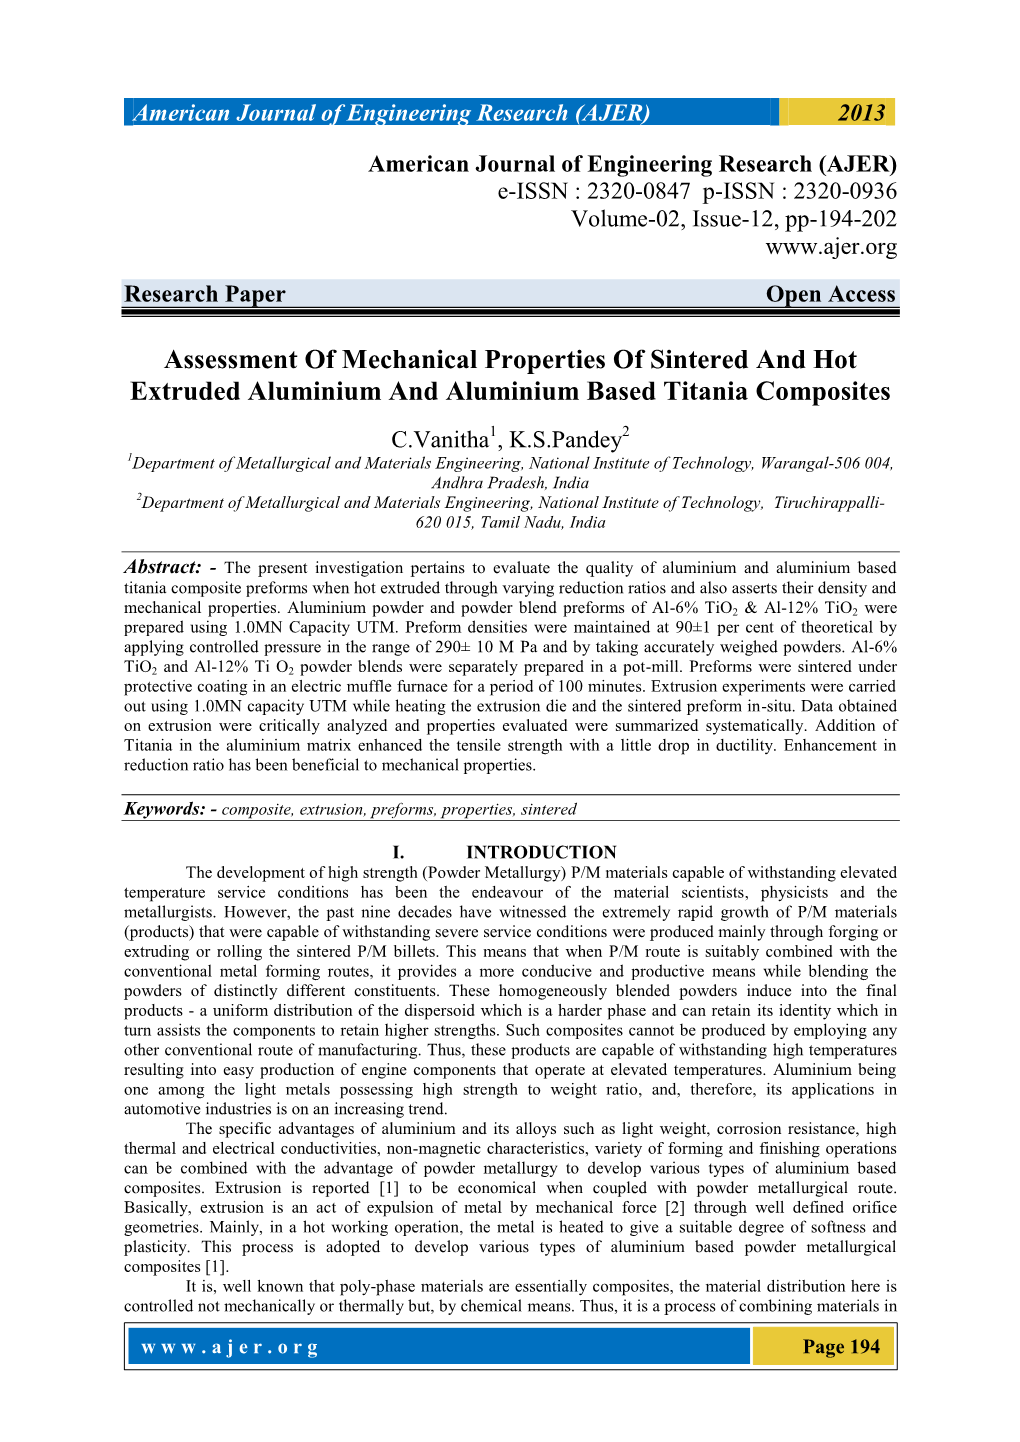 Assessment of Mechanical Properties of Sintered and Hot Extruded Aluminium and Aluminium Based Titania Composites